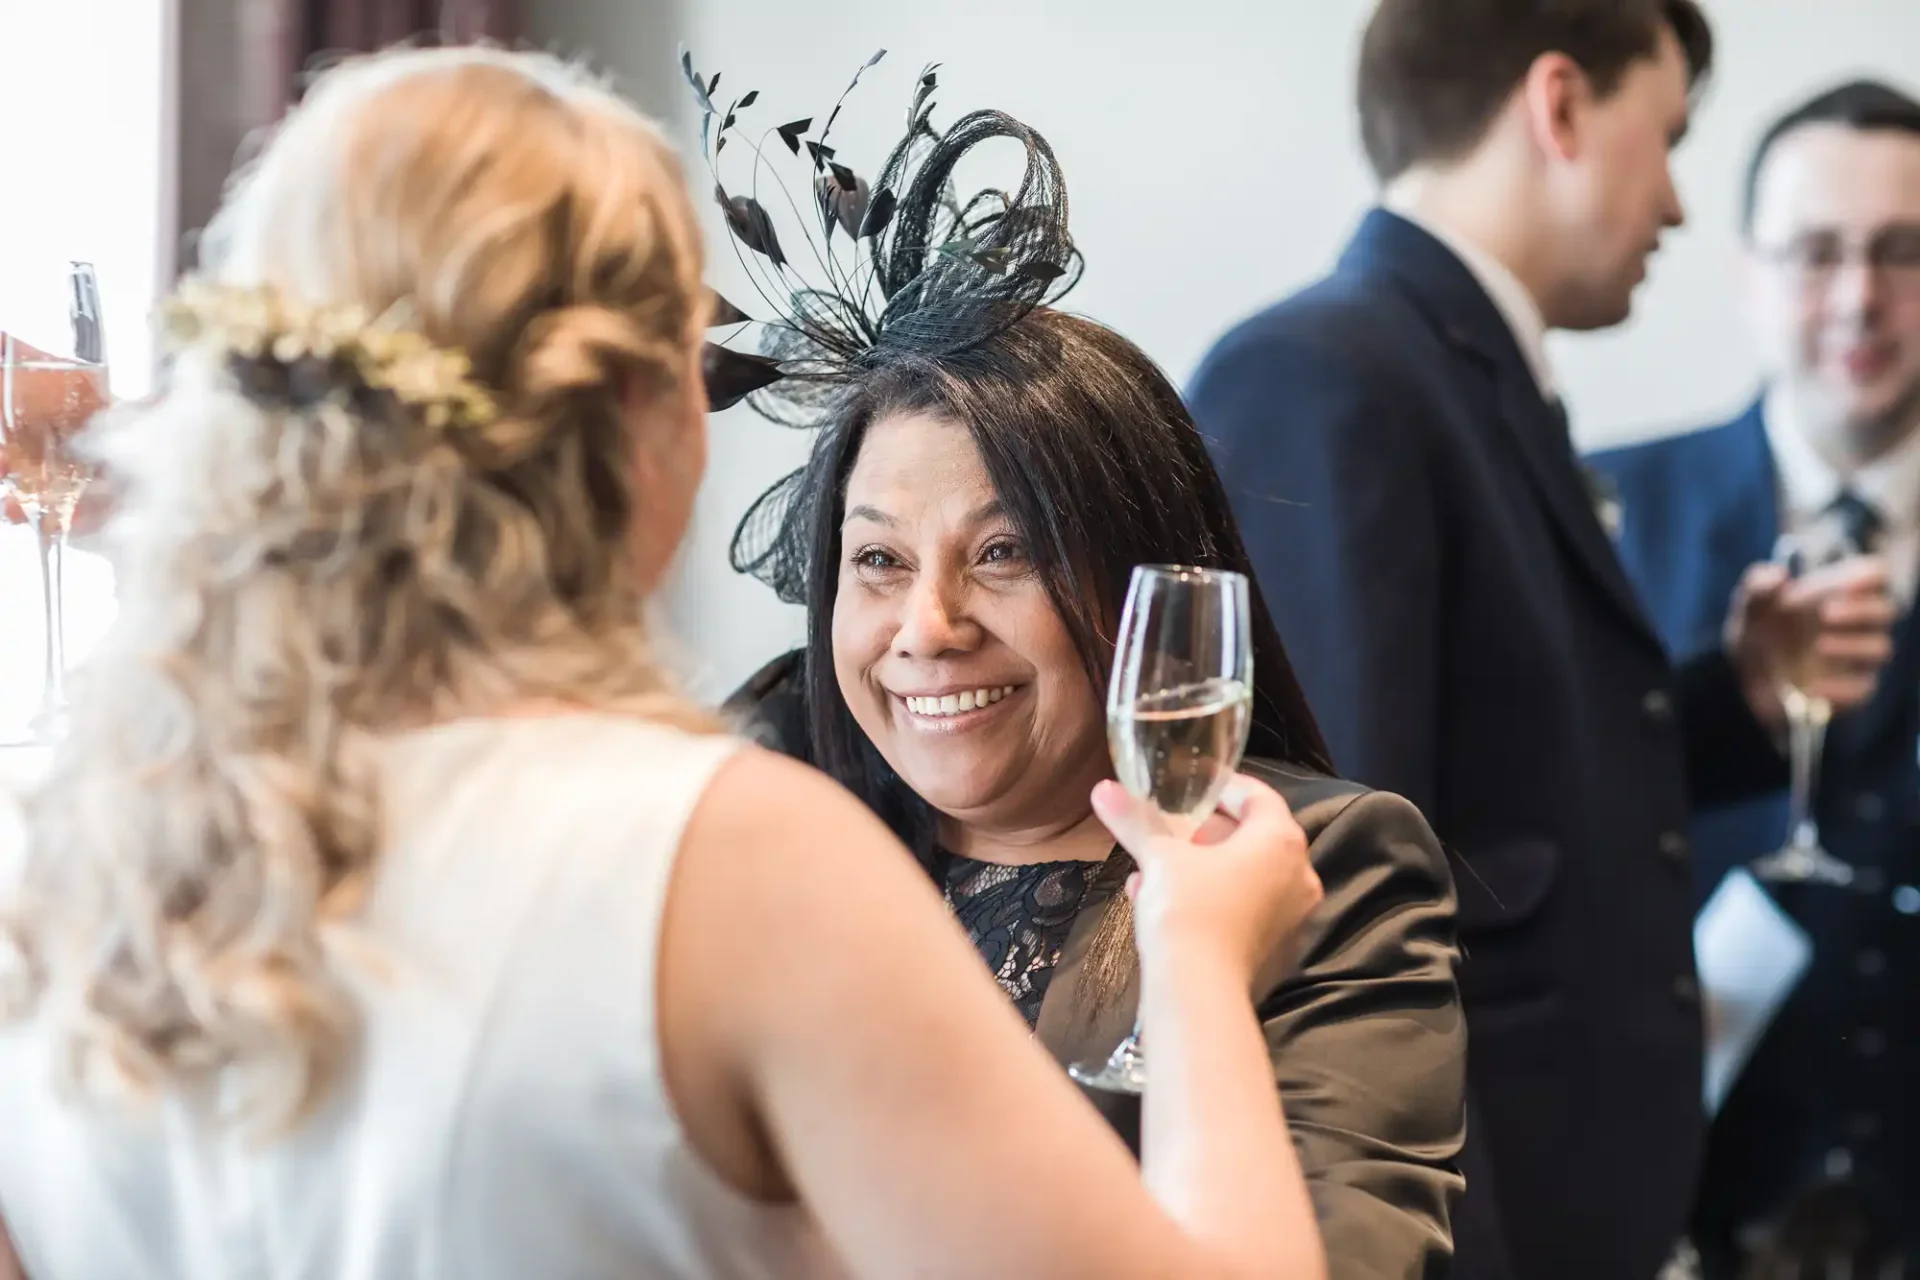 A woman in a black dress with a feathered headpiece smiles while holding a champagne glass, conversing with another guest at a social gathering.